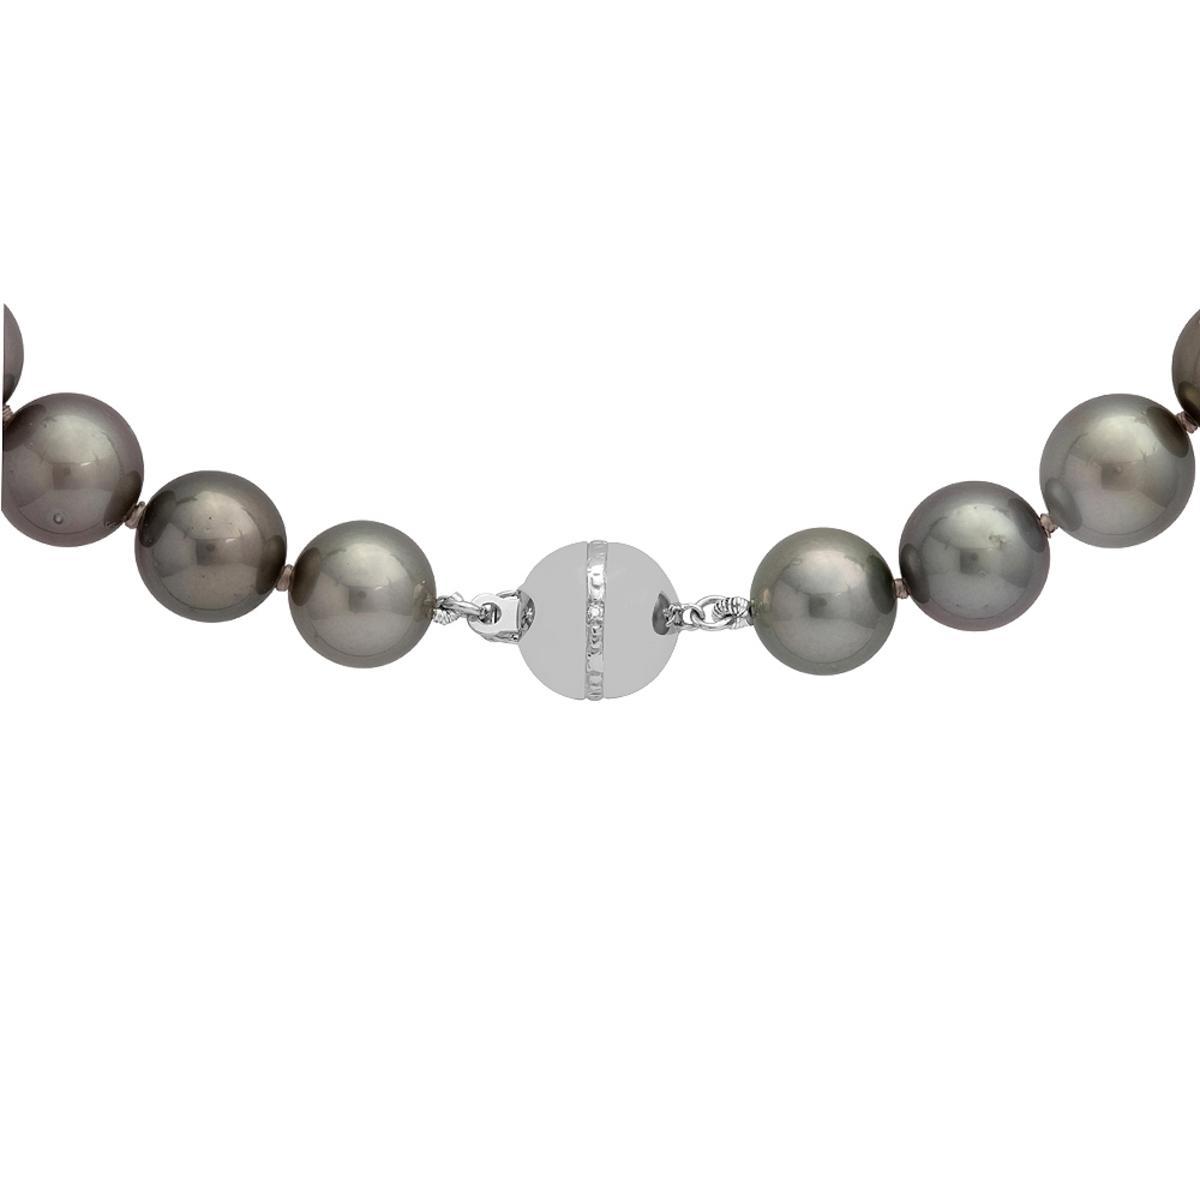 10-13mm Natural Black Pearl Necklace